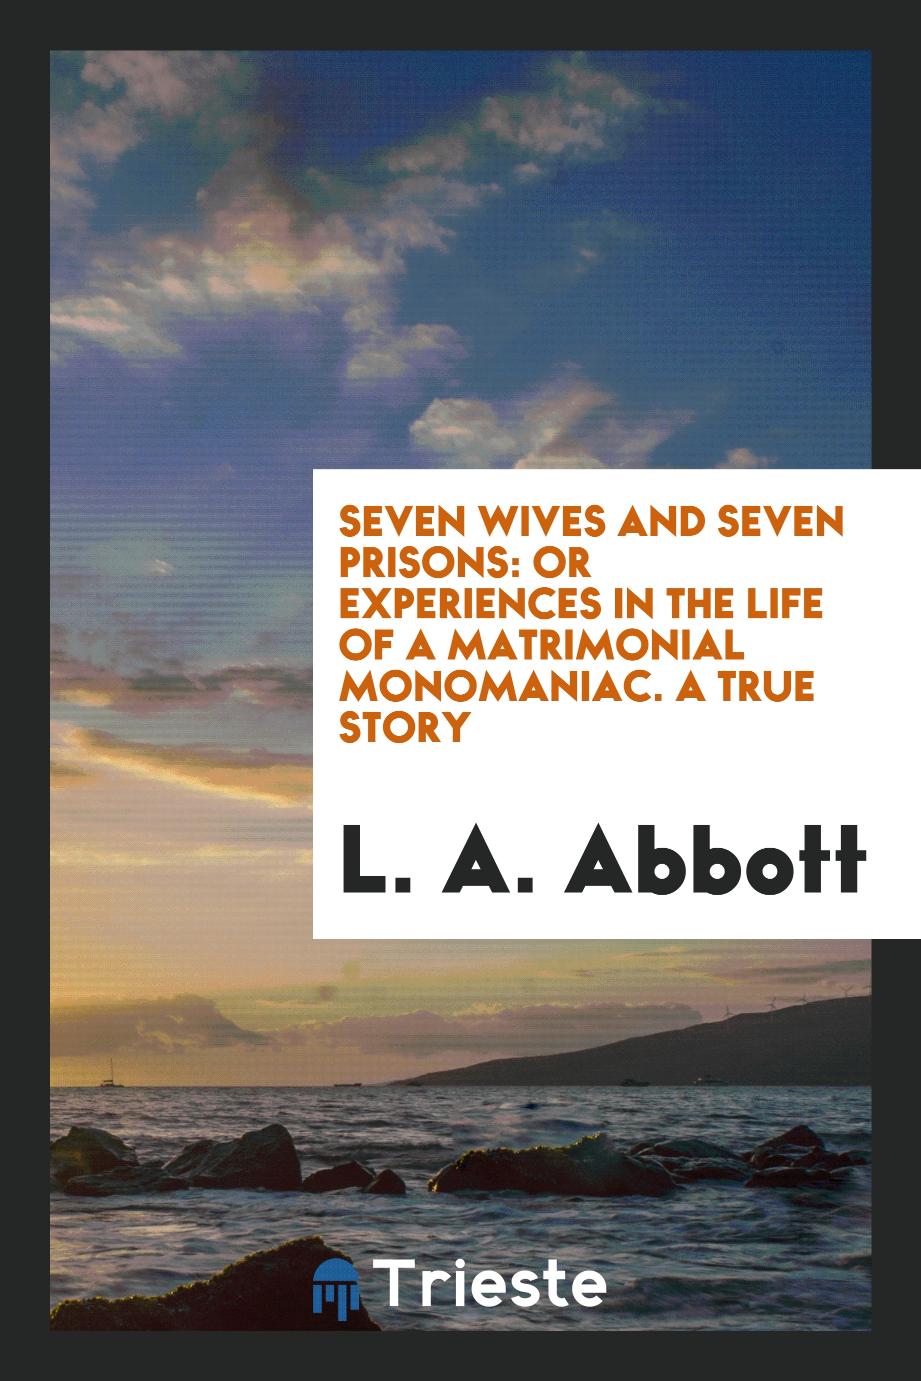 Seven wives and seven prisons: or Experiences in the life of a matrimonial monomaniac. A true story